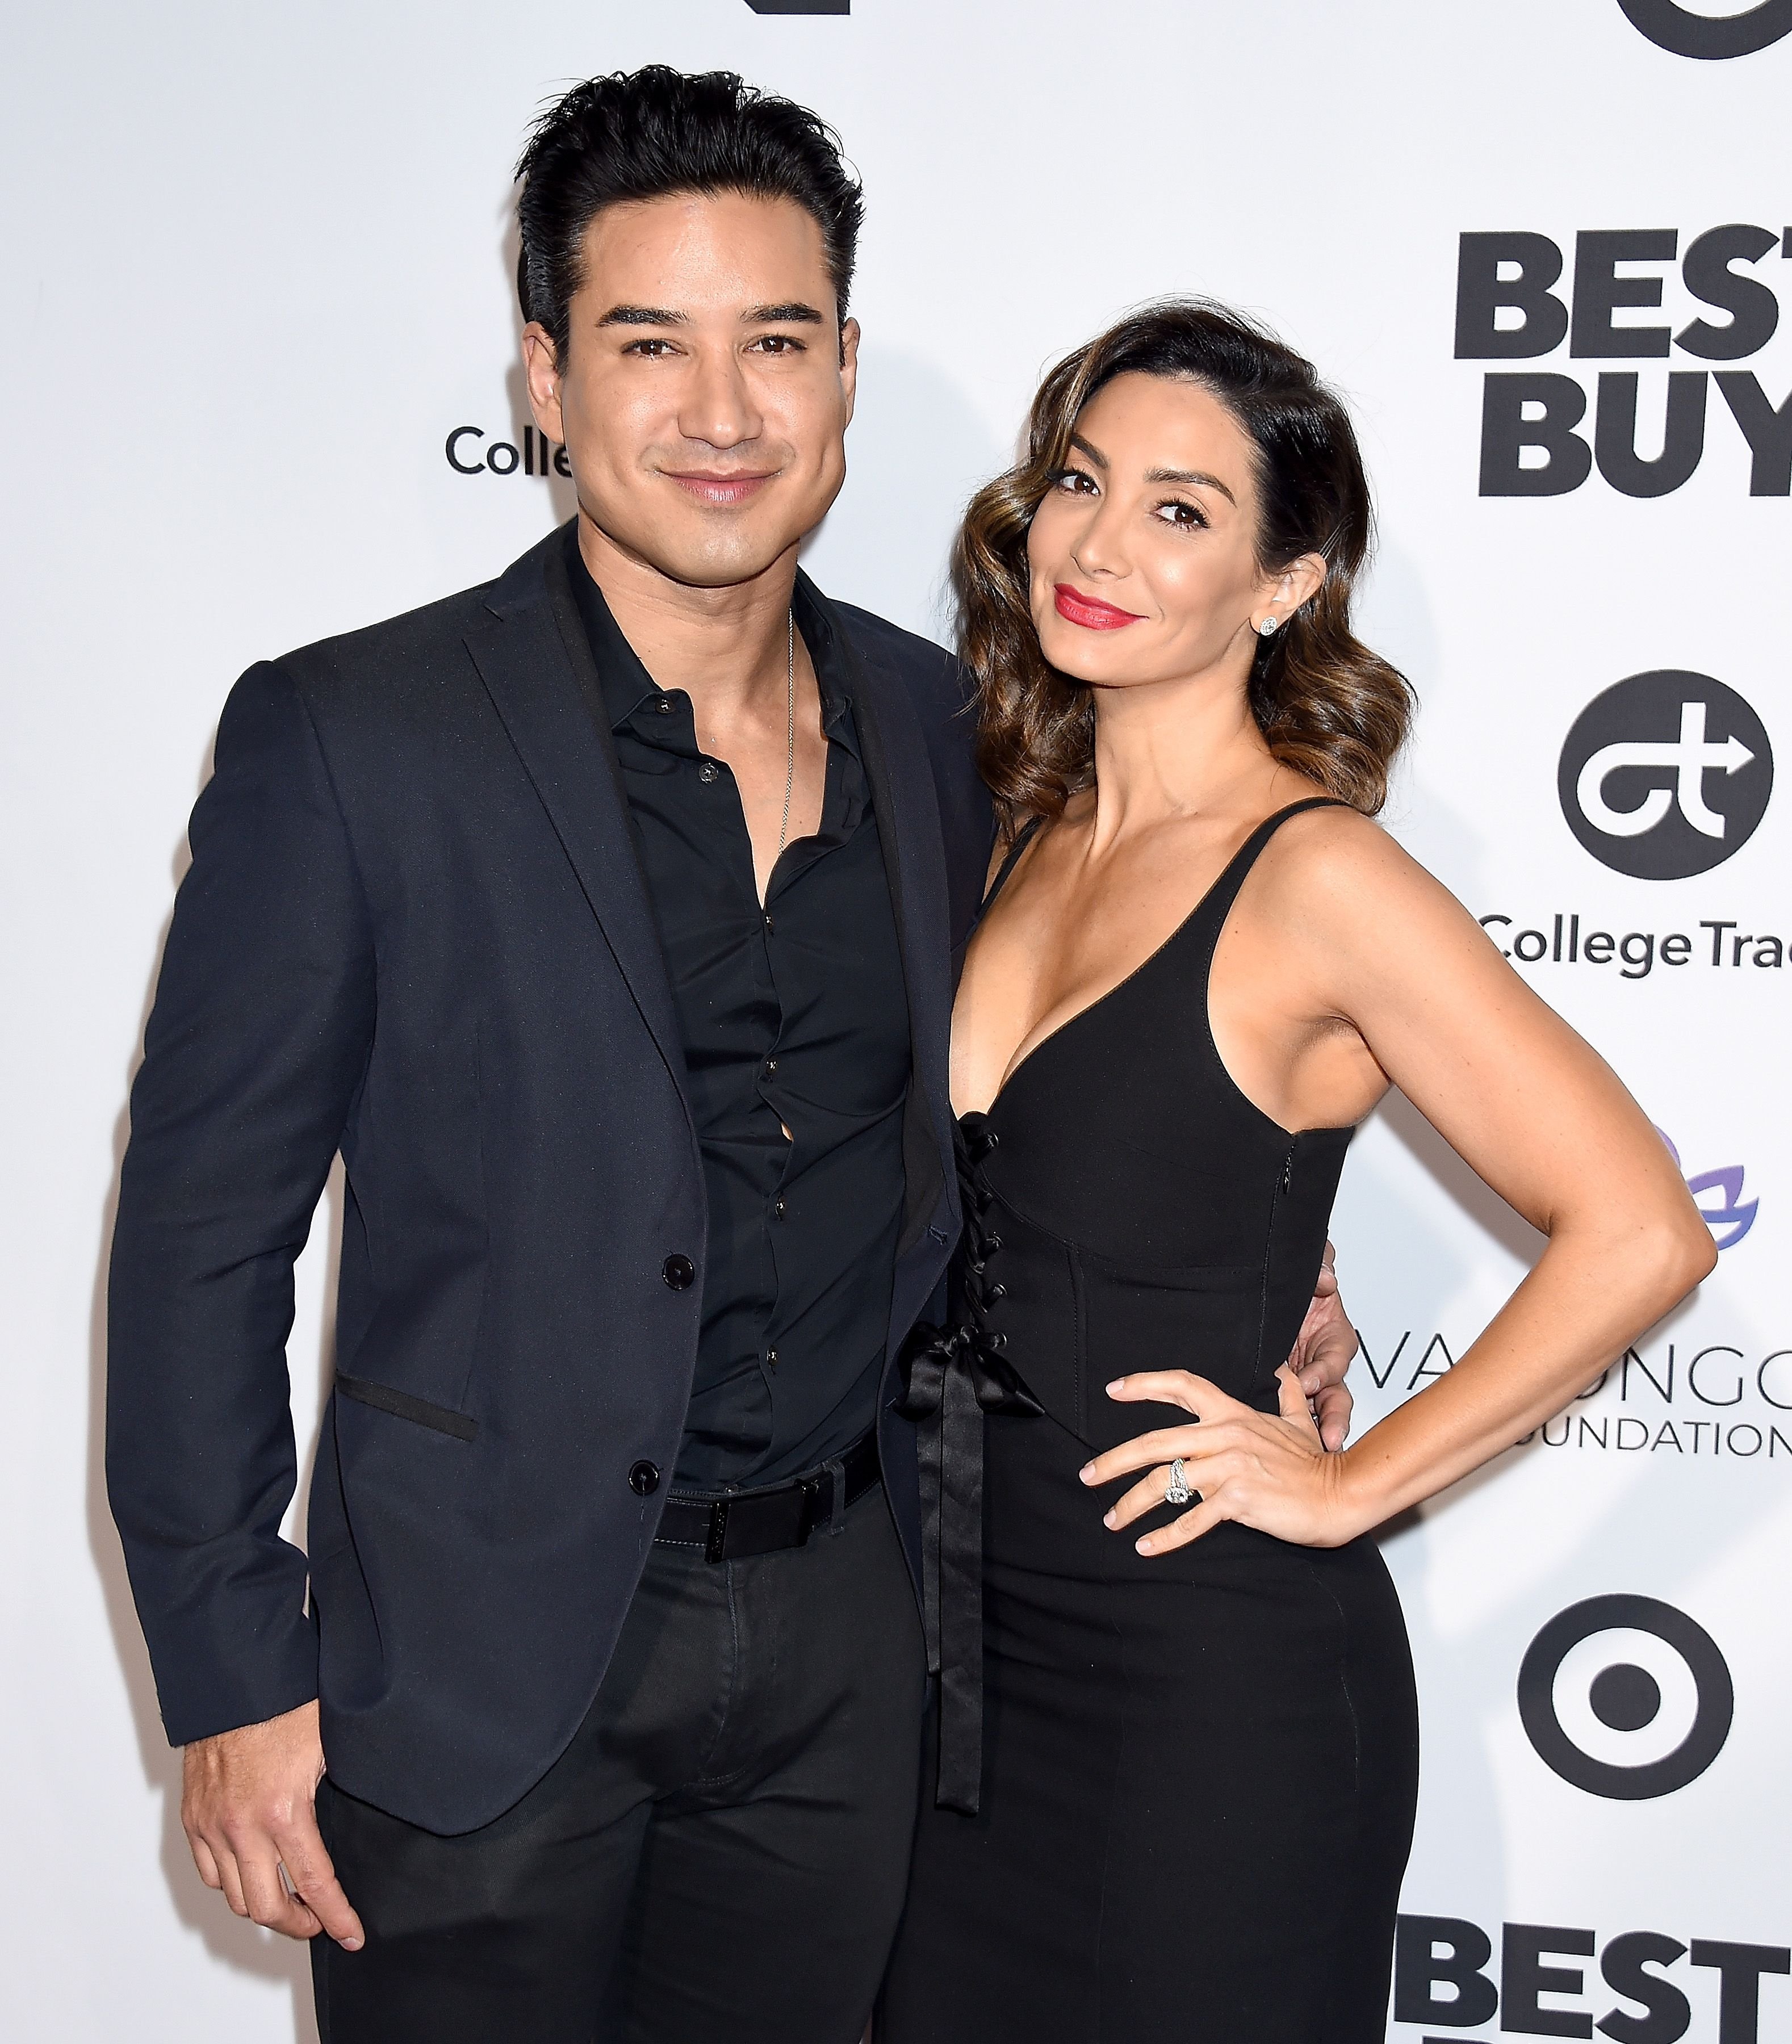 Mario Lopez and Courtney Laine Mazza at the Eva Longoria Foundation Dinner Gala at Four Seasons Hotel Los Angeles at Beverly Hills on November 8, 2018 | Photo: Getty Images